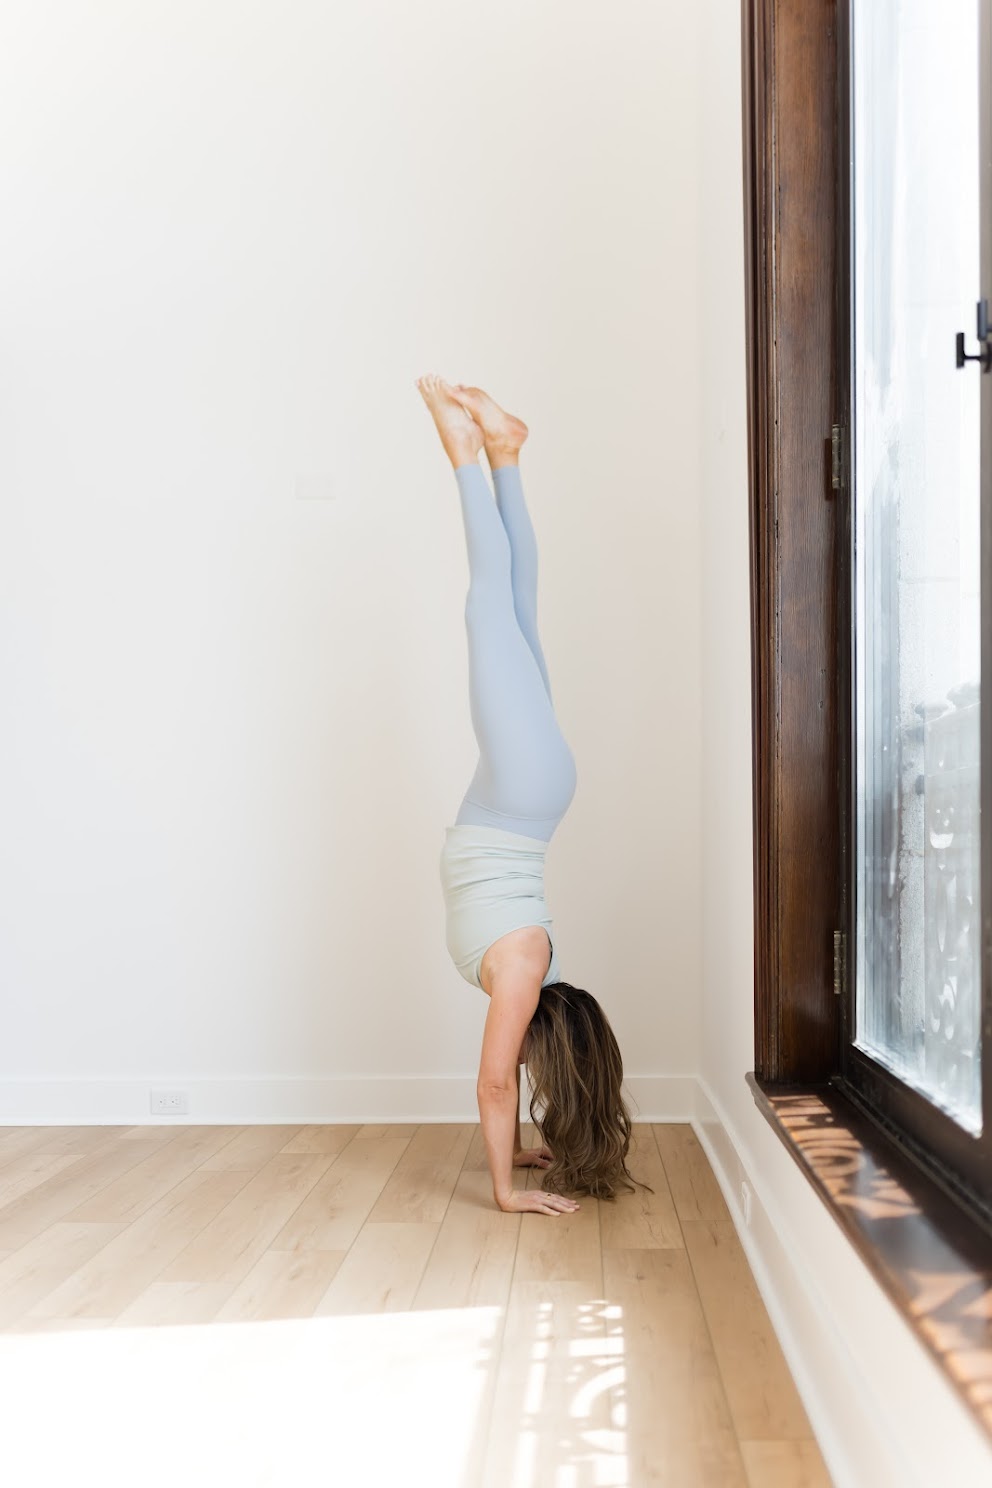 Kate Lombardo in Handstand near the wall